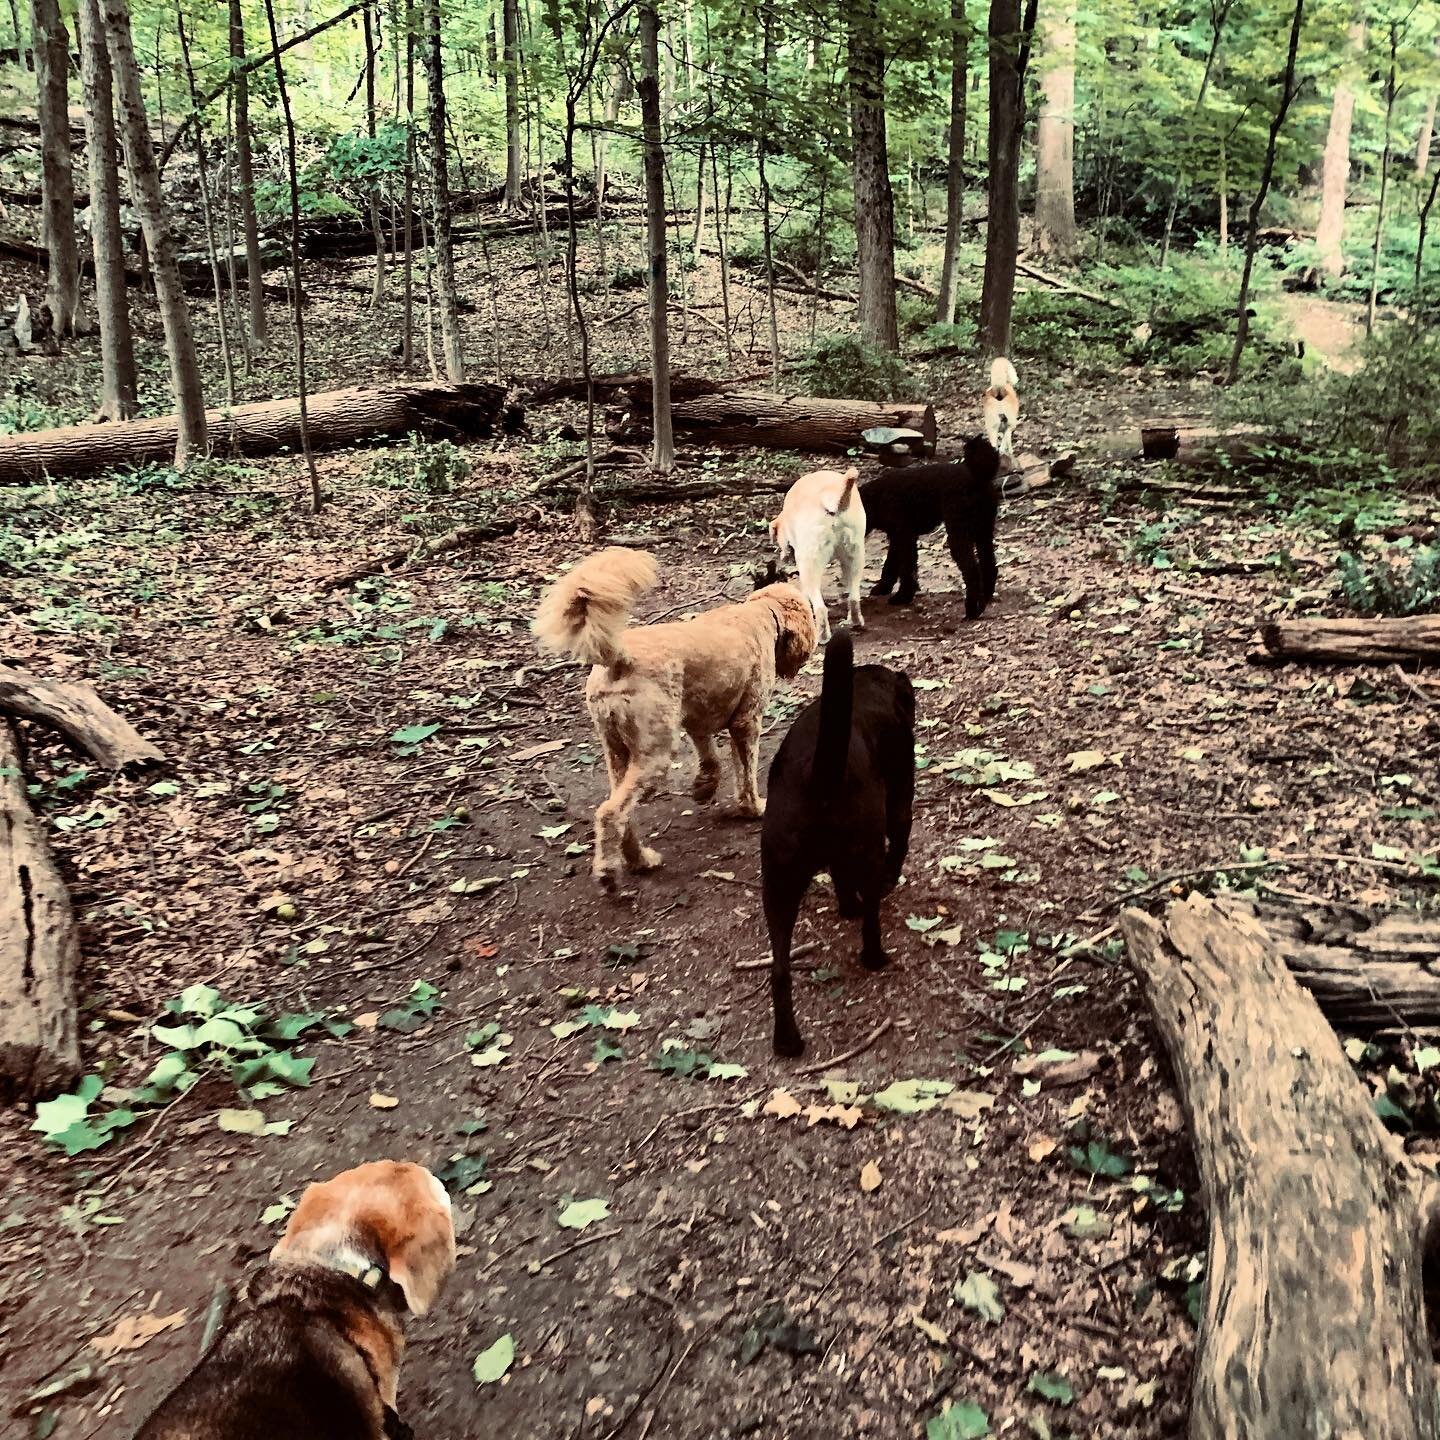 In the midst of chaos (tropical storm/blackout during a pandemic) all is peaceful at Zen Dog Pet Care! #trailhike #dogheaven #zendoglife